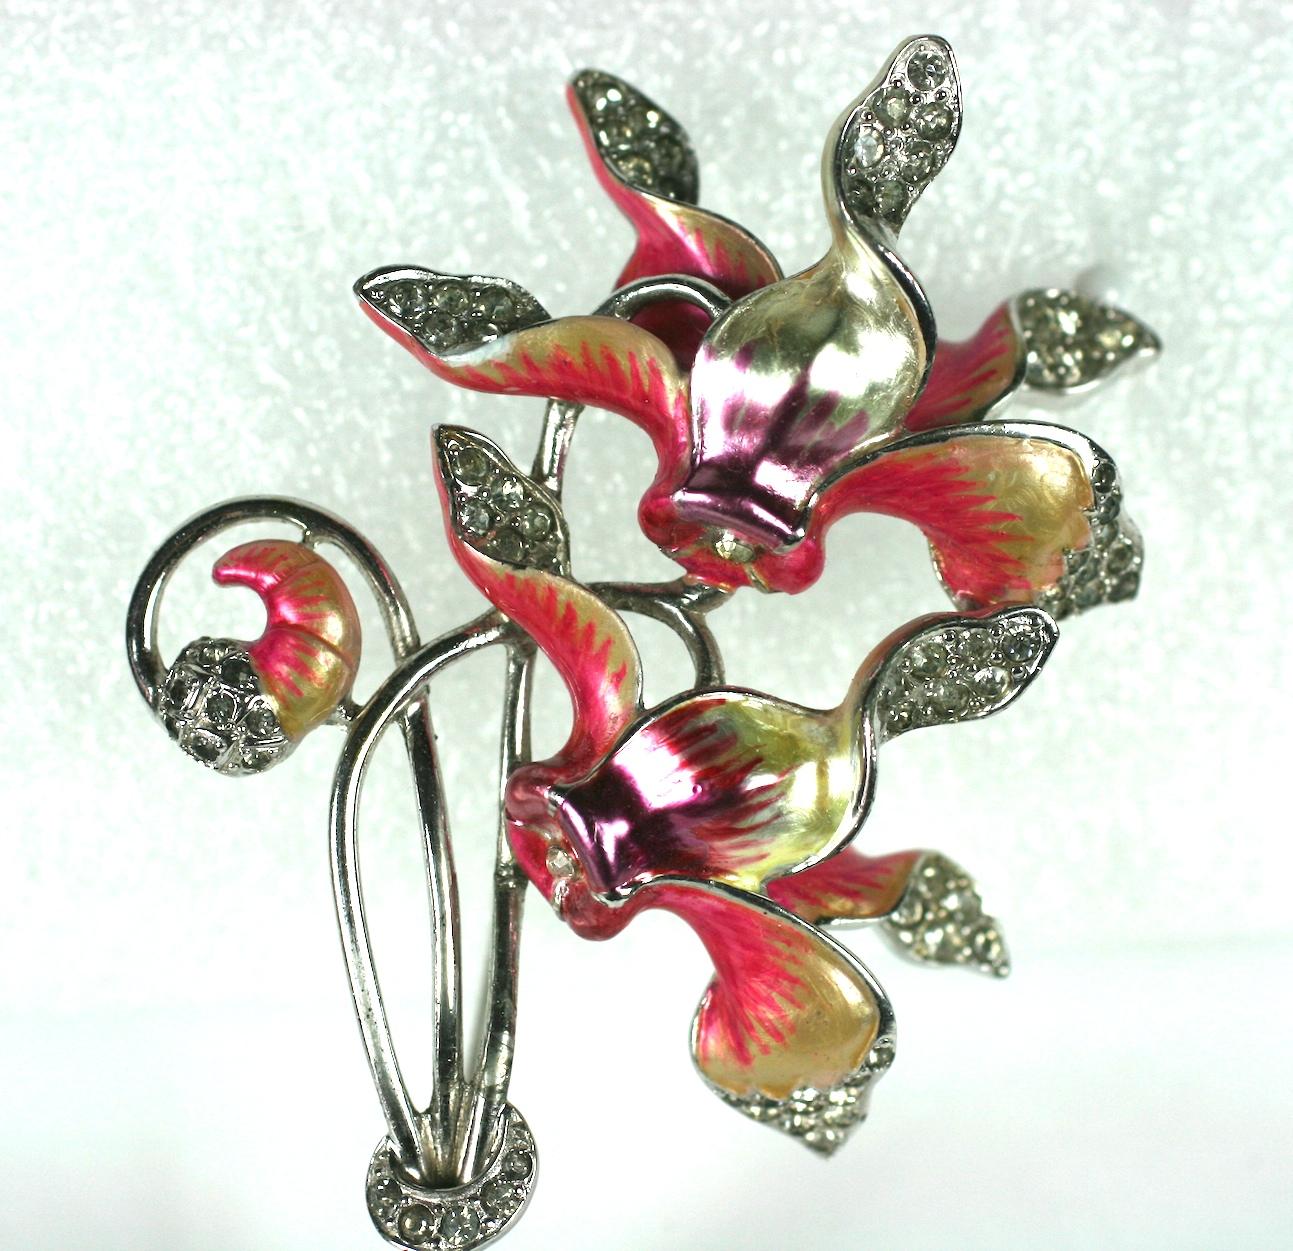 Rare Marcel Boucher Double Cyclamen flower bouquet Retro brooch of rhodium plated metal, crystal pave rhinestones and hand pearlized pastel enameling.
Marked: MB (phrygian cap), 1940's USA.
Excellent Condition
Length 4